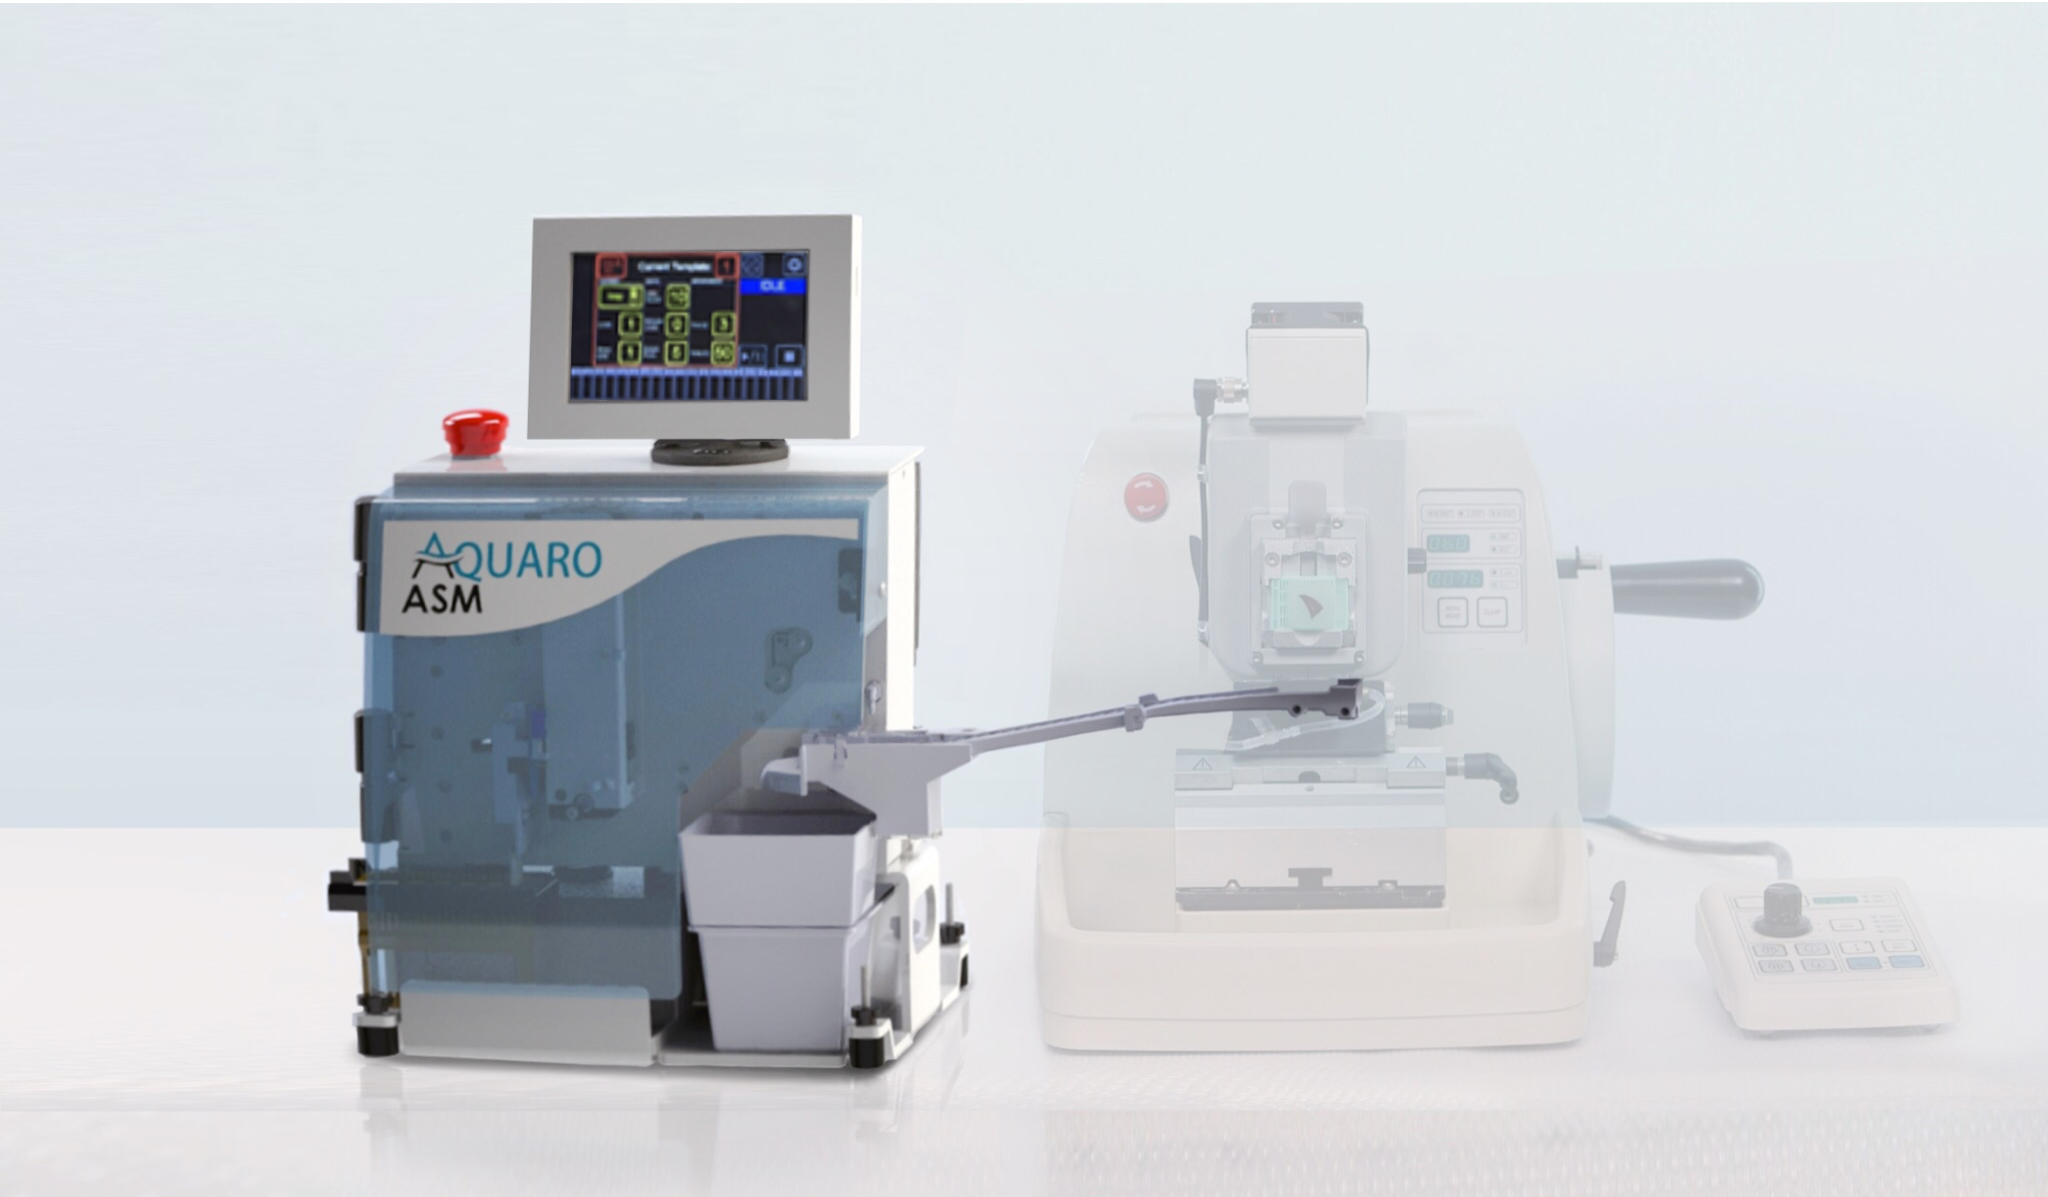 The Aquaro ASM is the first benchtop system to to automate section mounting, transferring paraffin-embedded histology sections from the microtome to slides.